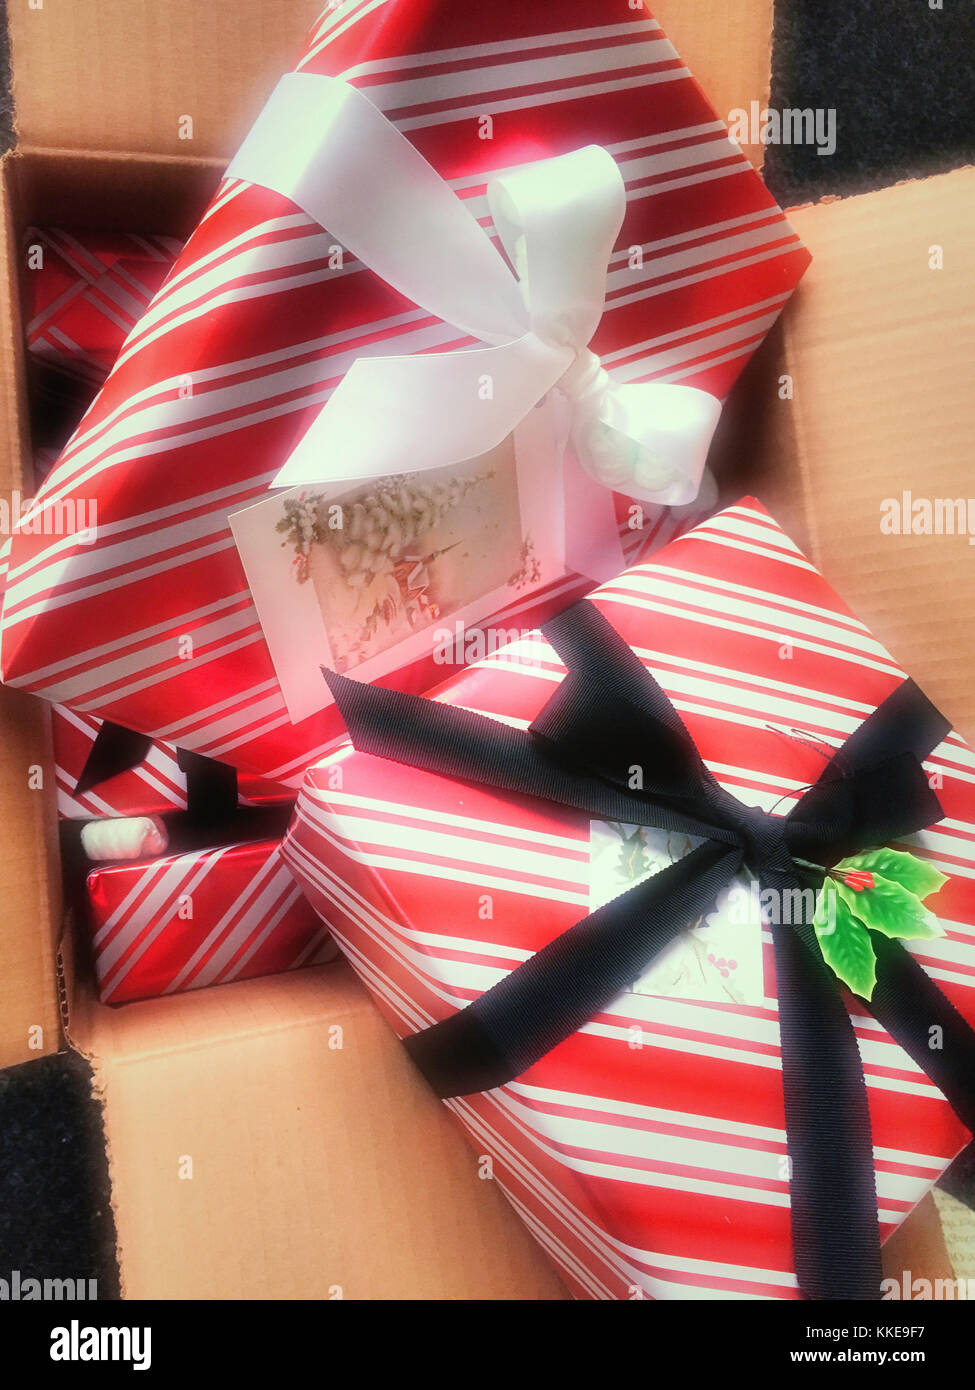 Wrapped Christmas Presents in Packing Box, USA Stock Photo